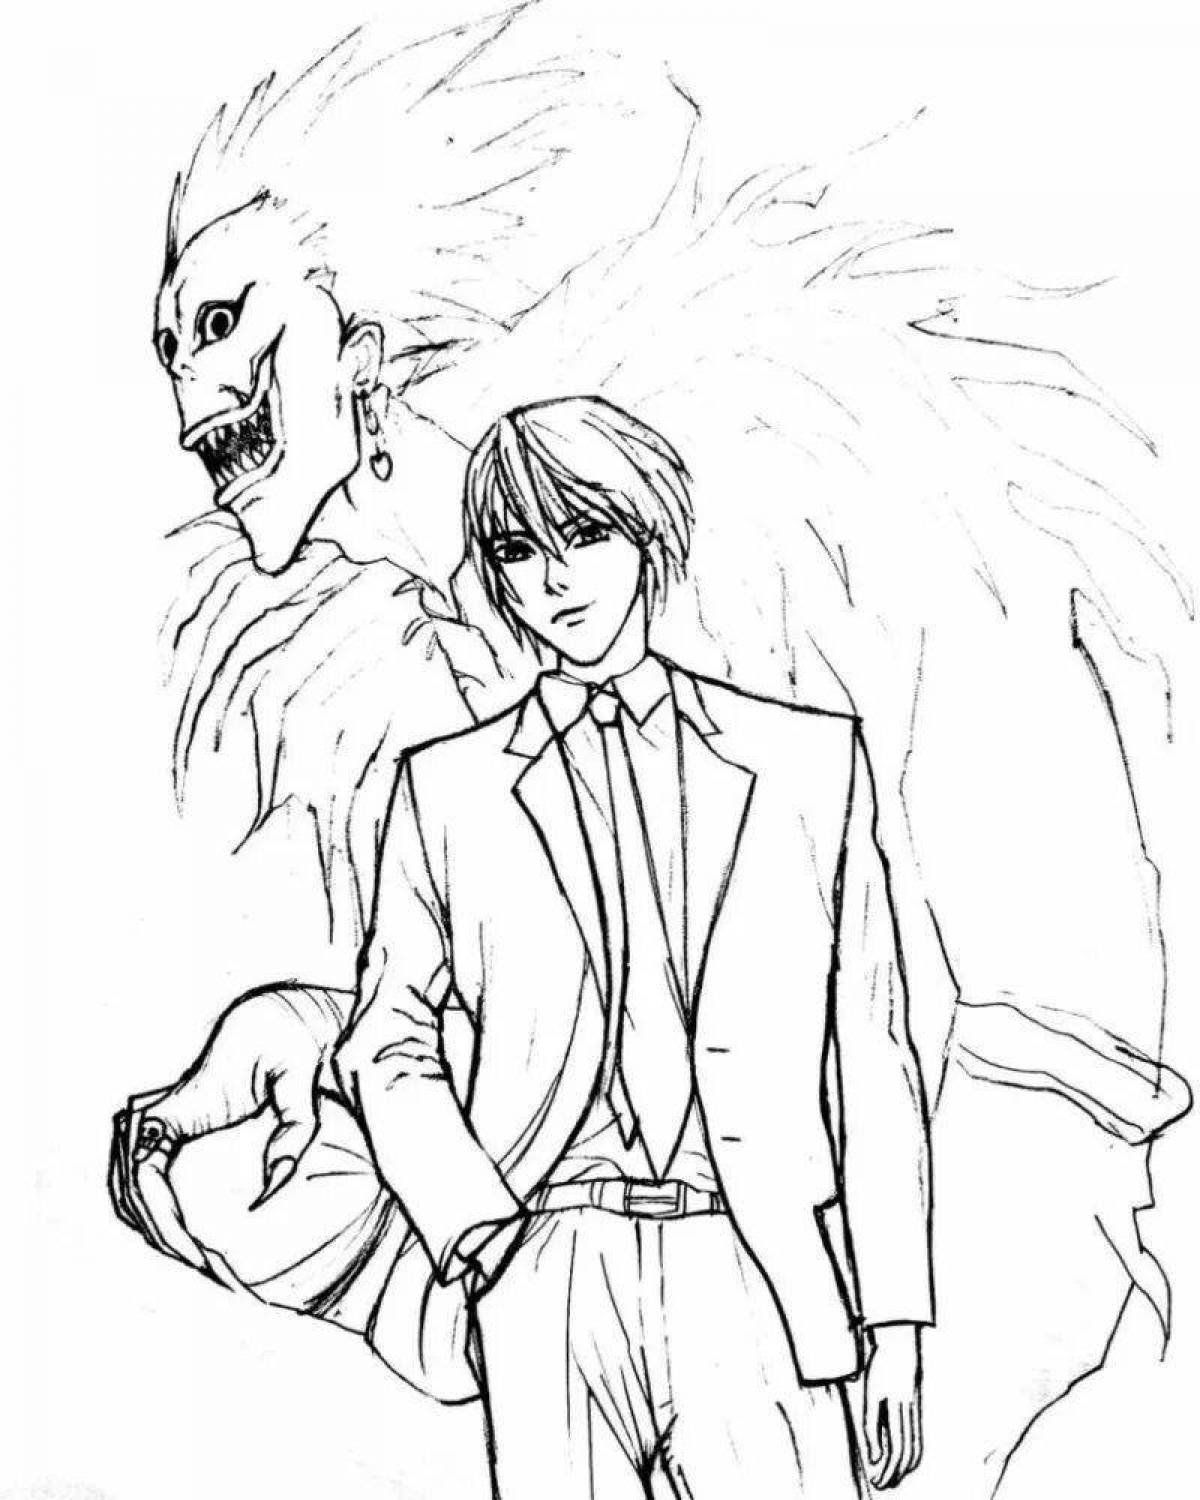 Charming yagami light coloring page